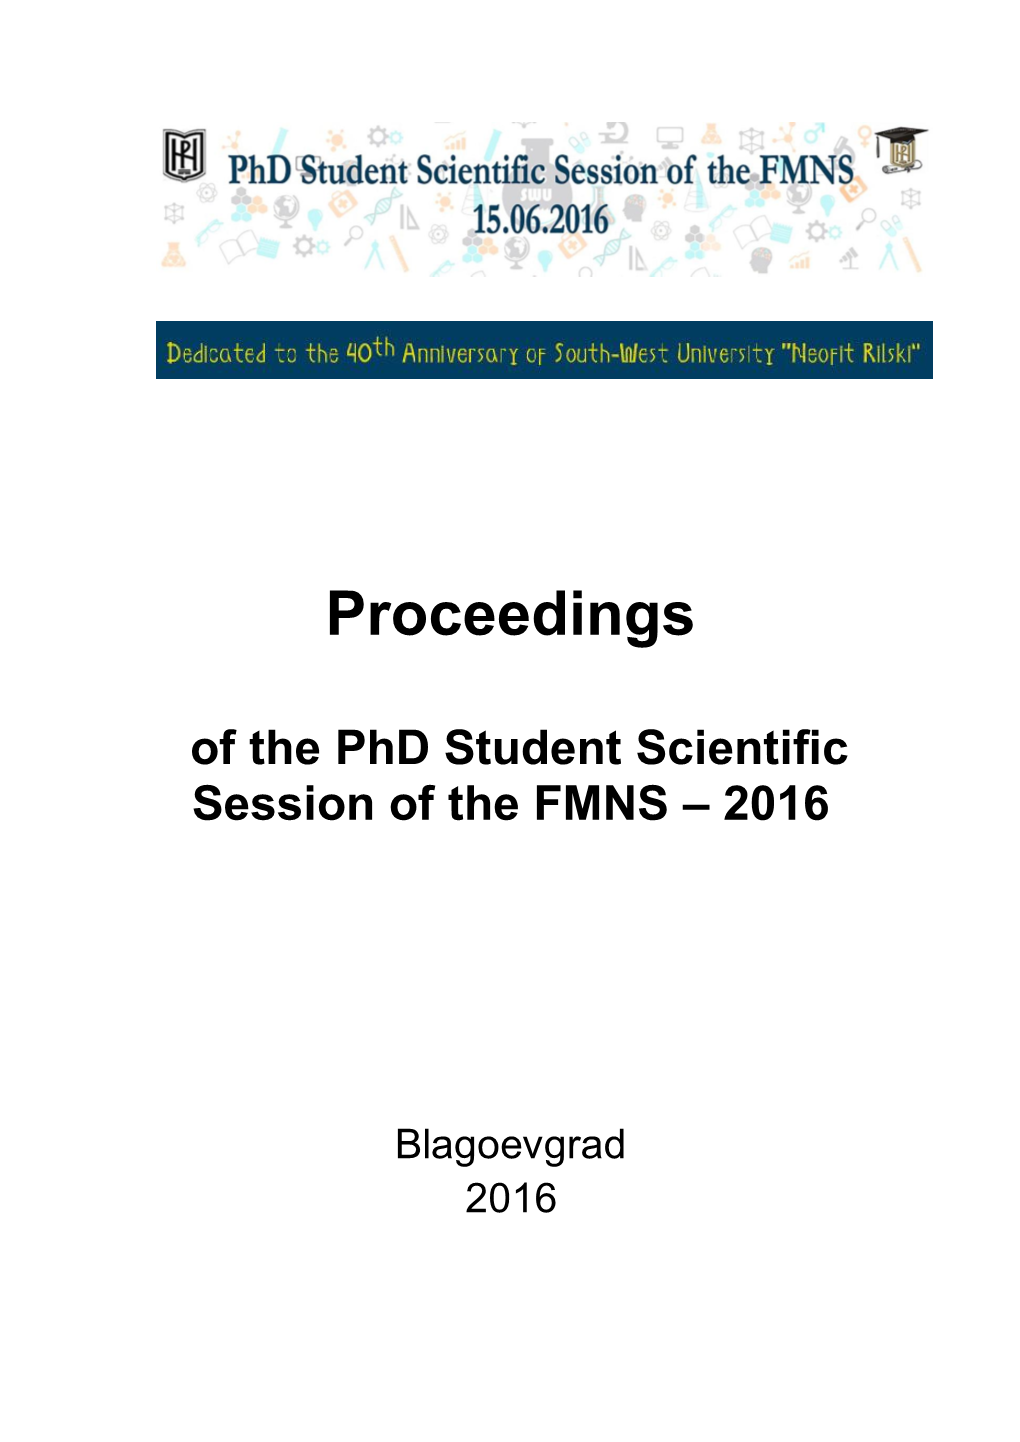 Proceedings of the Phd Student Scientific Session of the FMNS – 2016